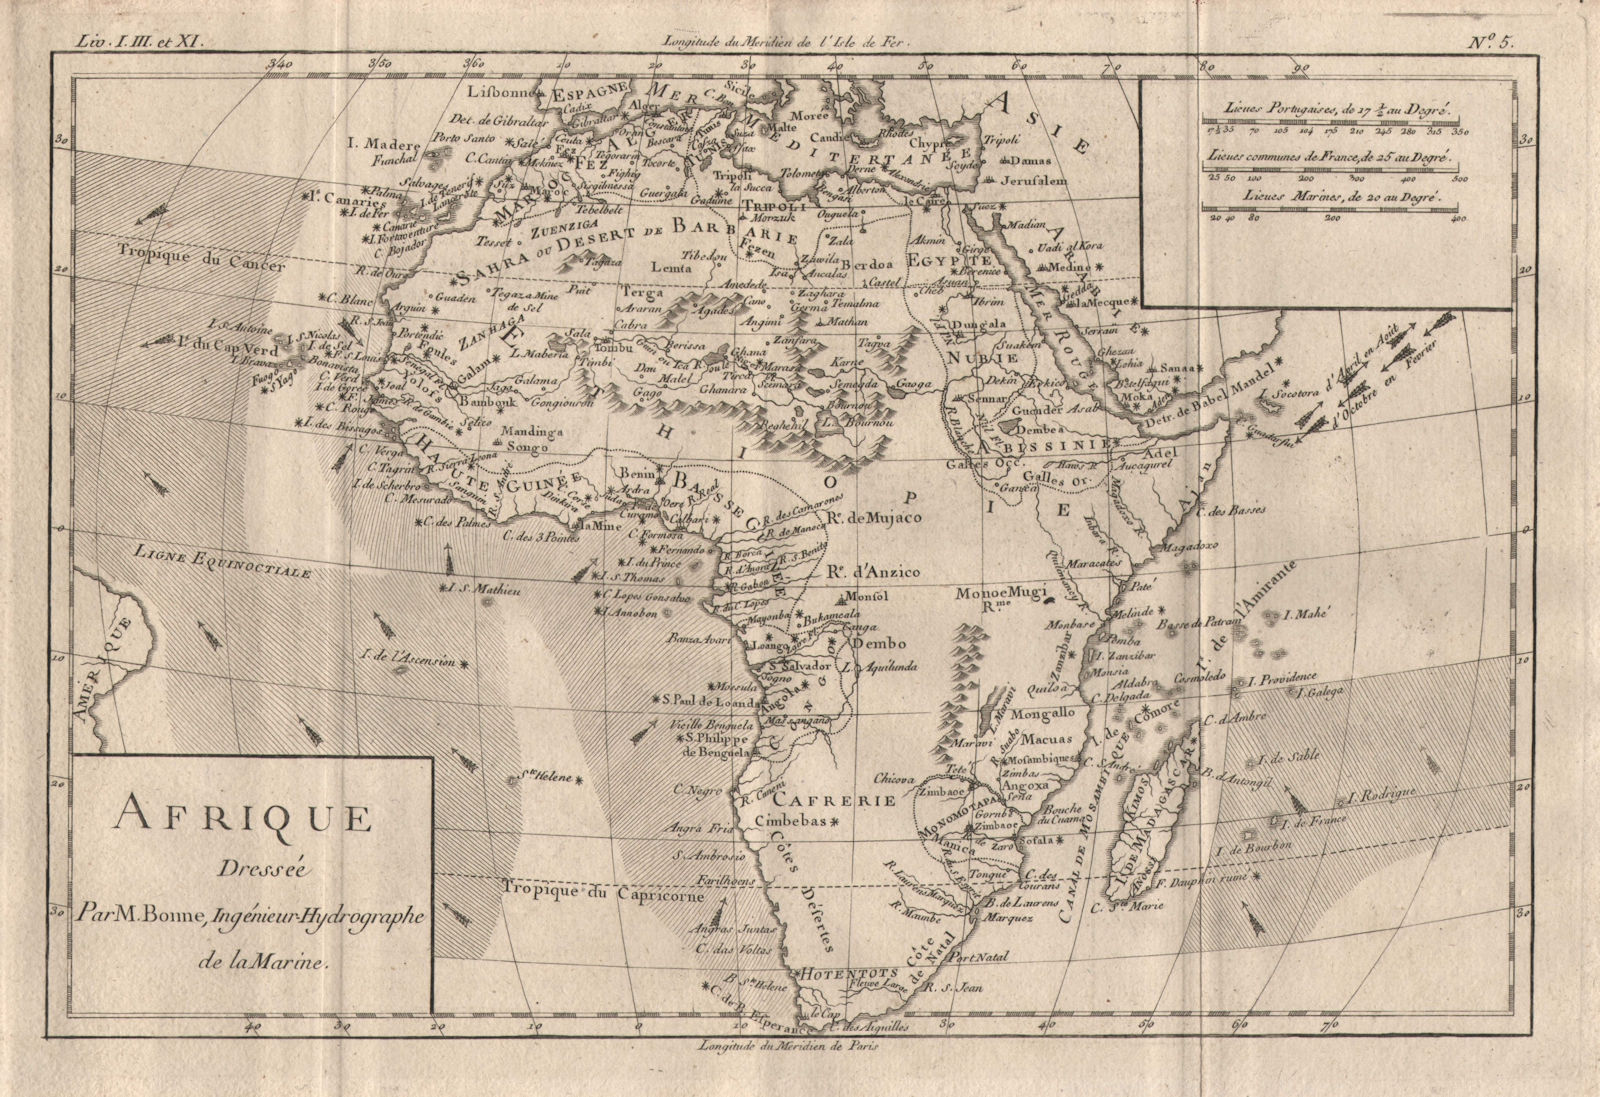 Associate Product "Afrique". Africa, showing the trade winds. BONNE 1780 old antique map chart